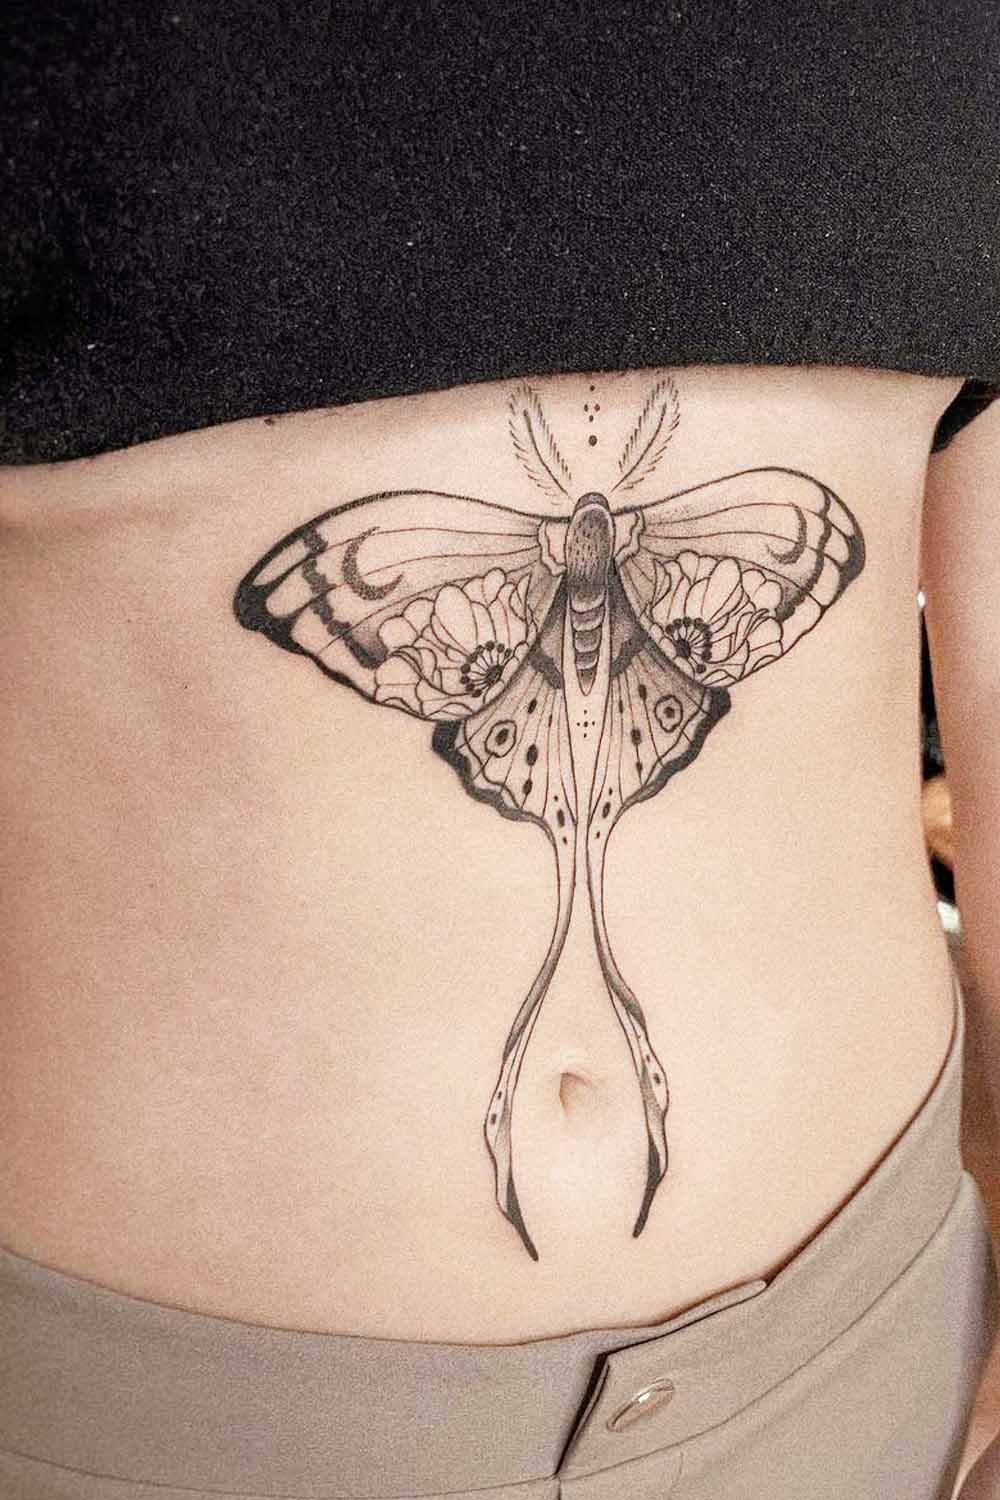 Big Sternum Tattoo with Butterfly